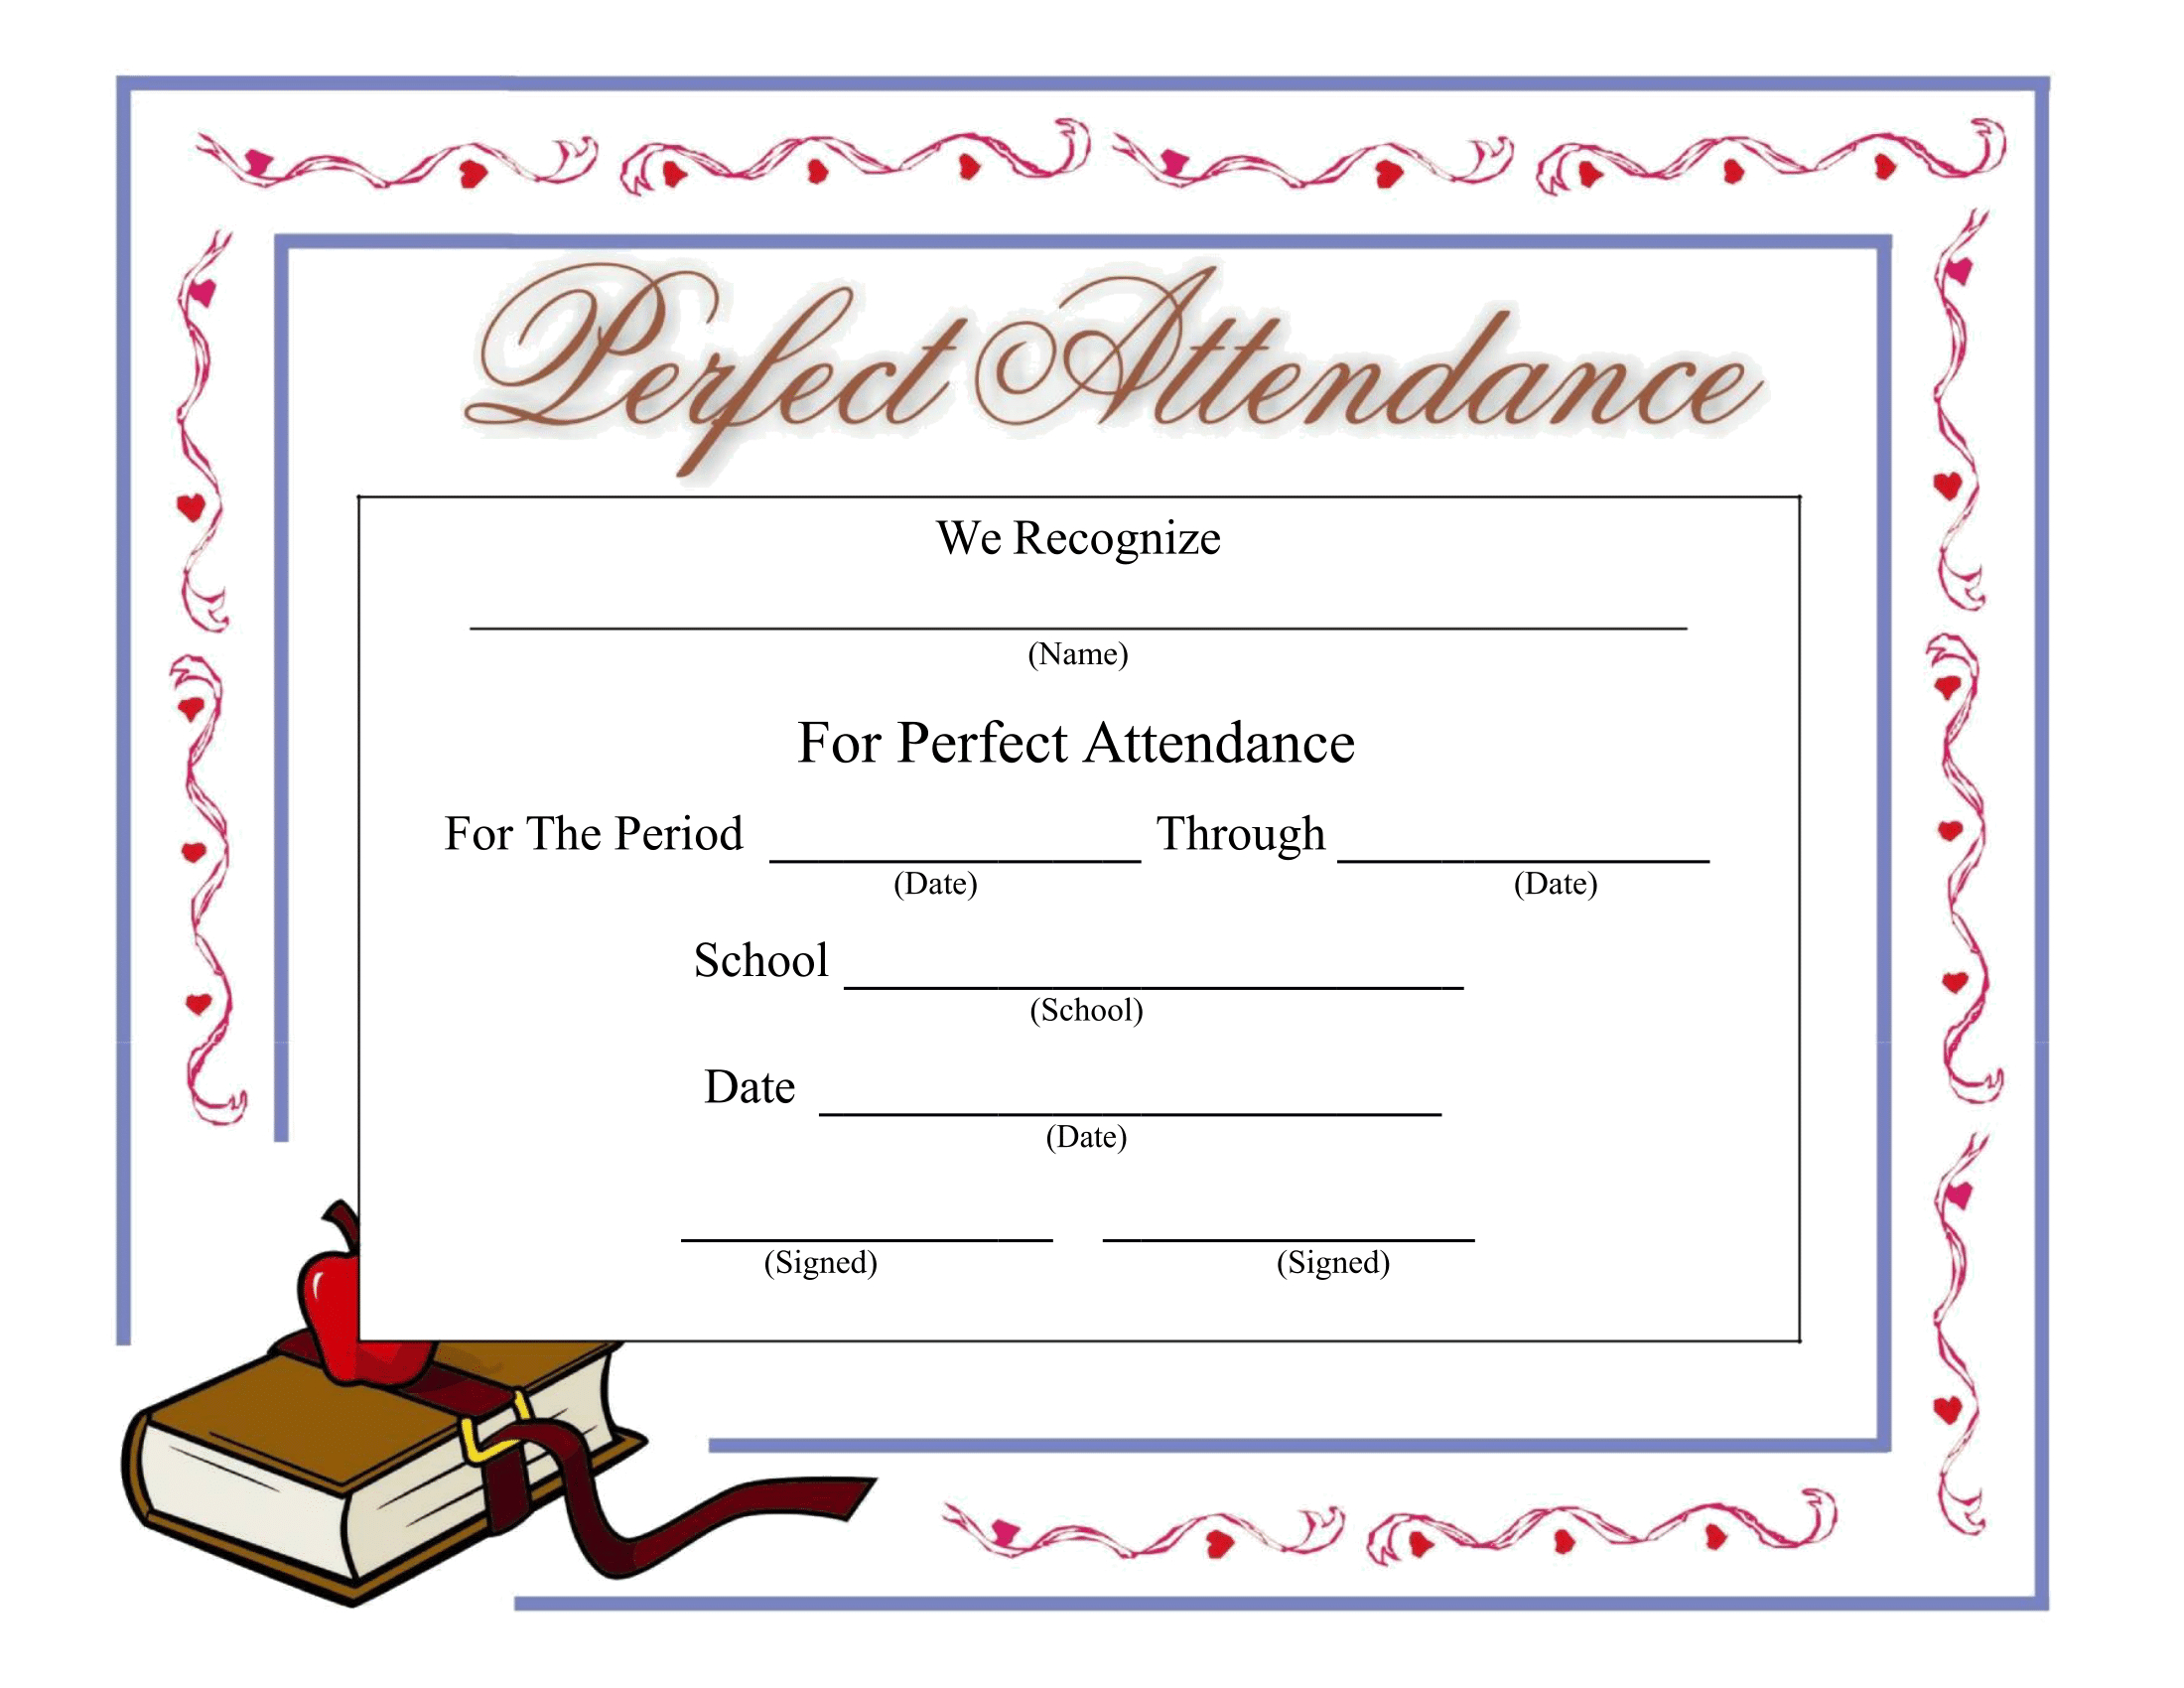 Stupendous Perfect Attendance Certificate Printable Dora s Throughout 